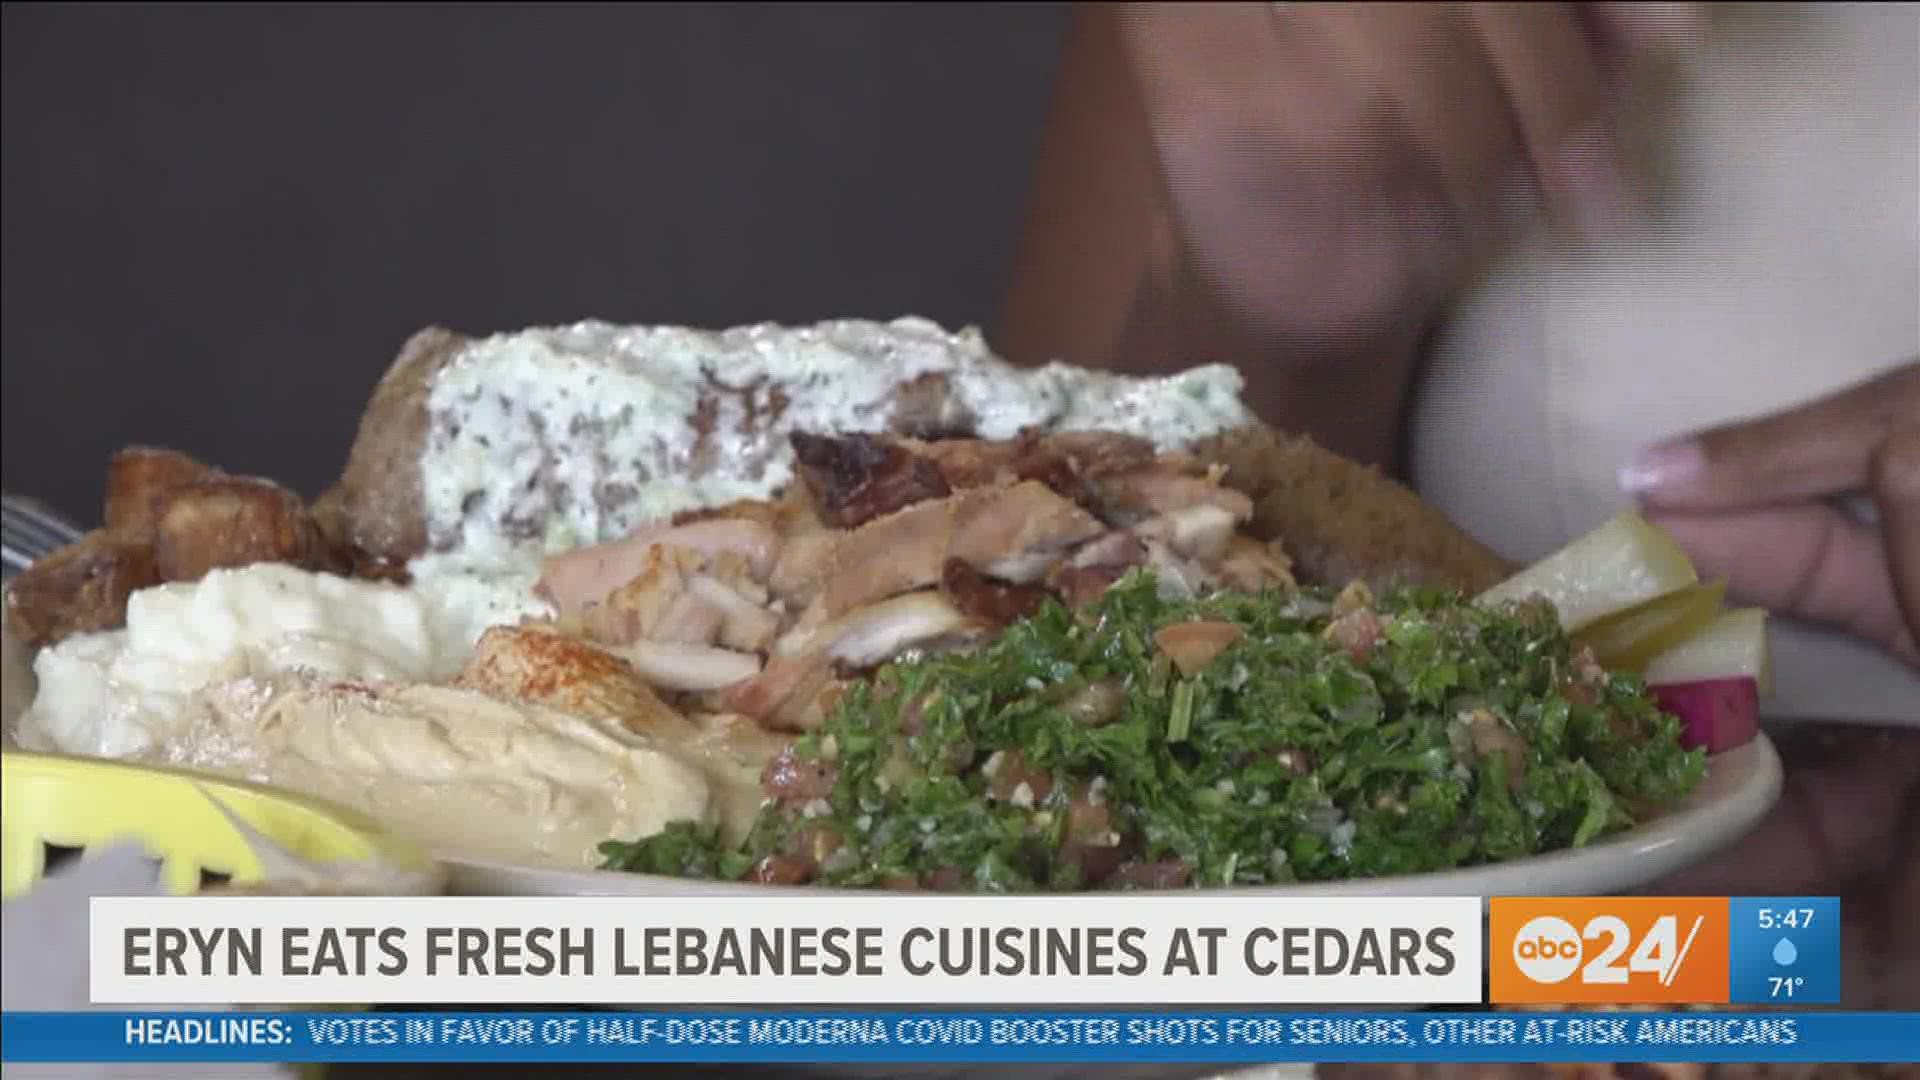 Anchor Eryn Rogers experiences Lebanese cuisine and culture at Cedars restaurant in Cordova with fresh herbs and spices piling on the plates.